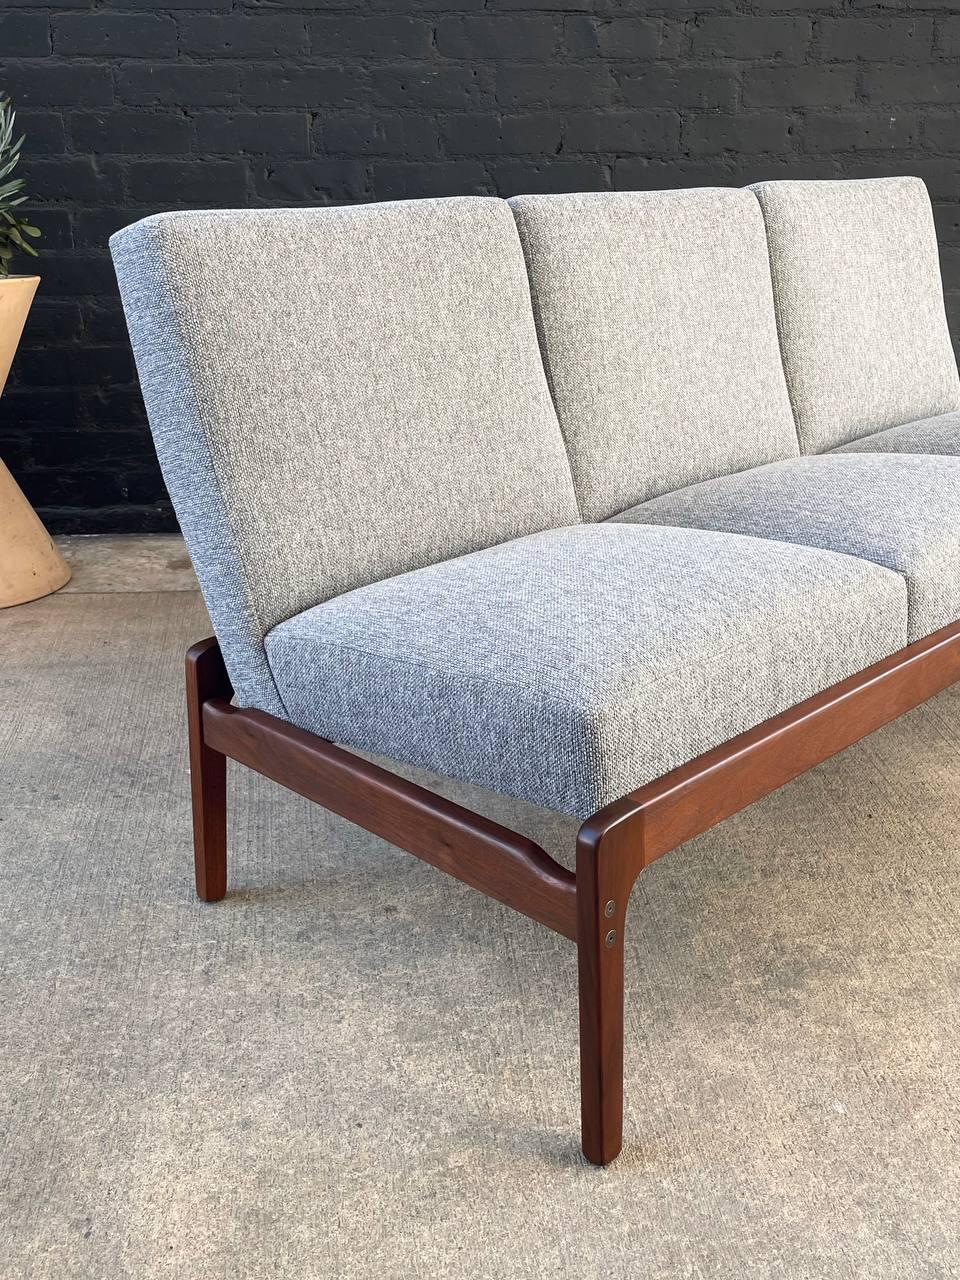 Newly Refinished - Mid-Century Modern Sculpted Walnut & New Tweed Fabric Sofa For Sale 2